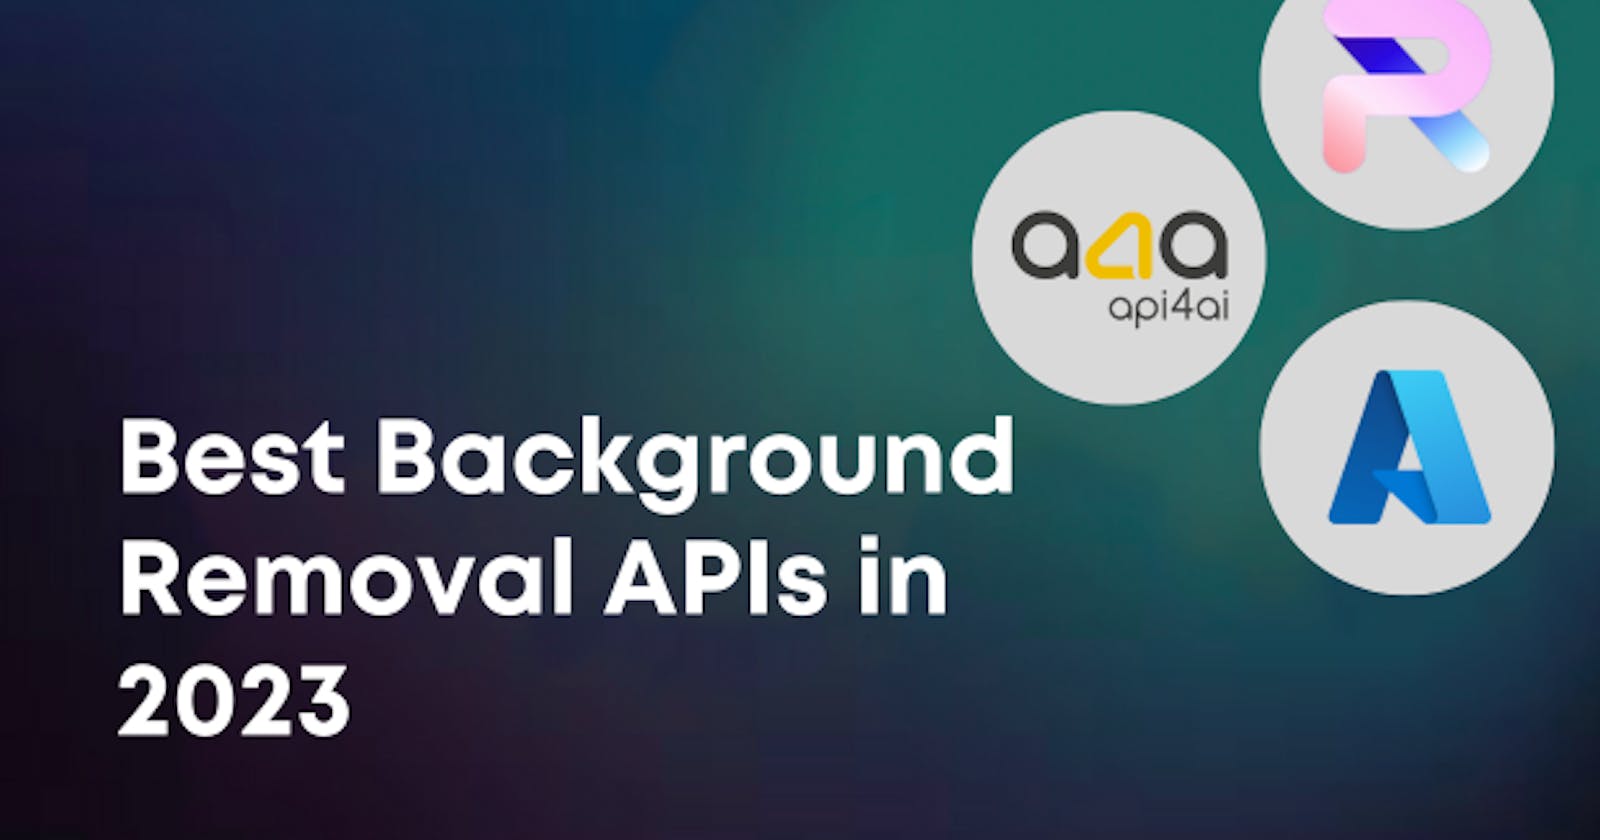 Best Background Removal APIs in 2023